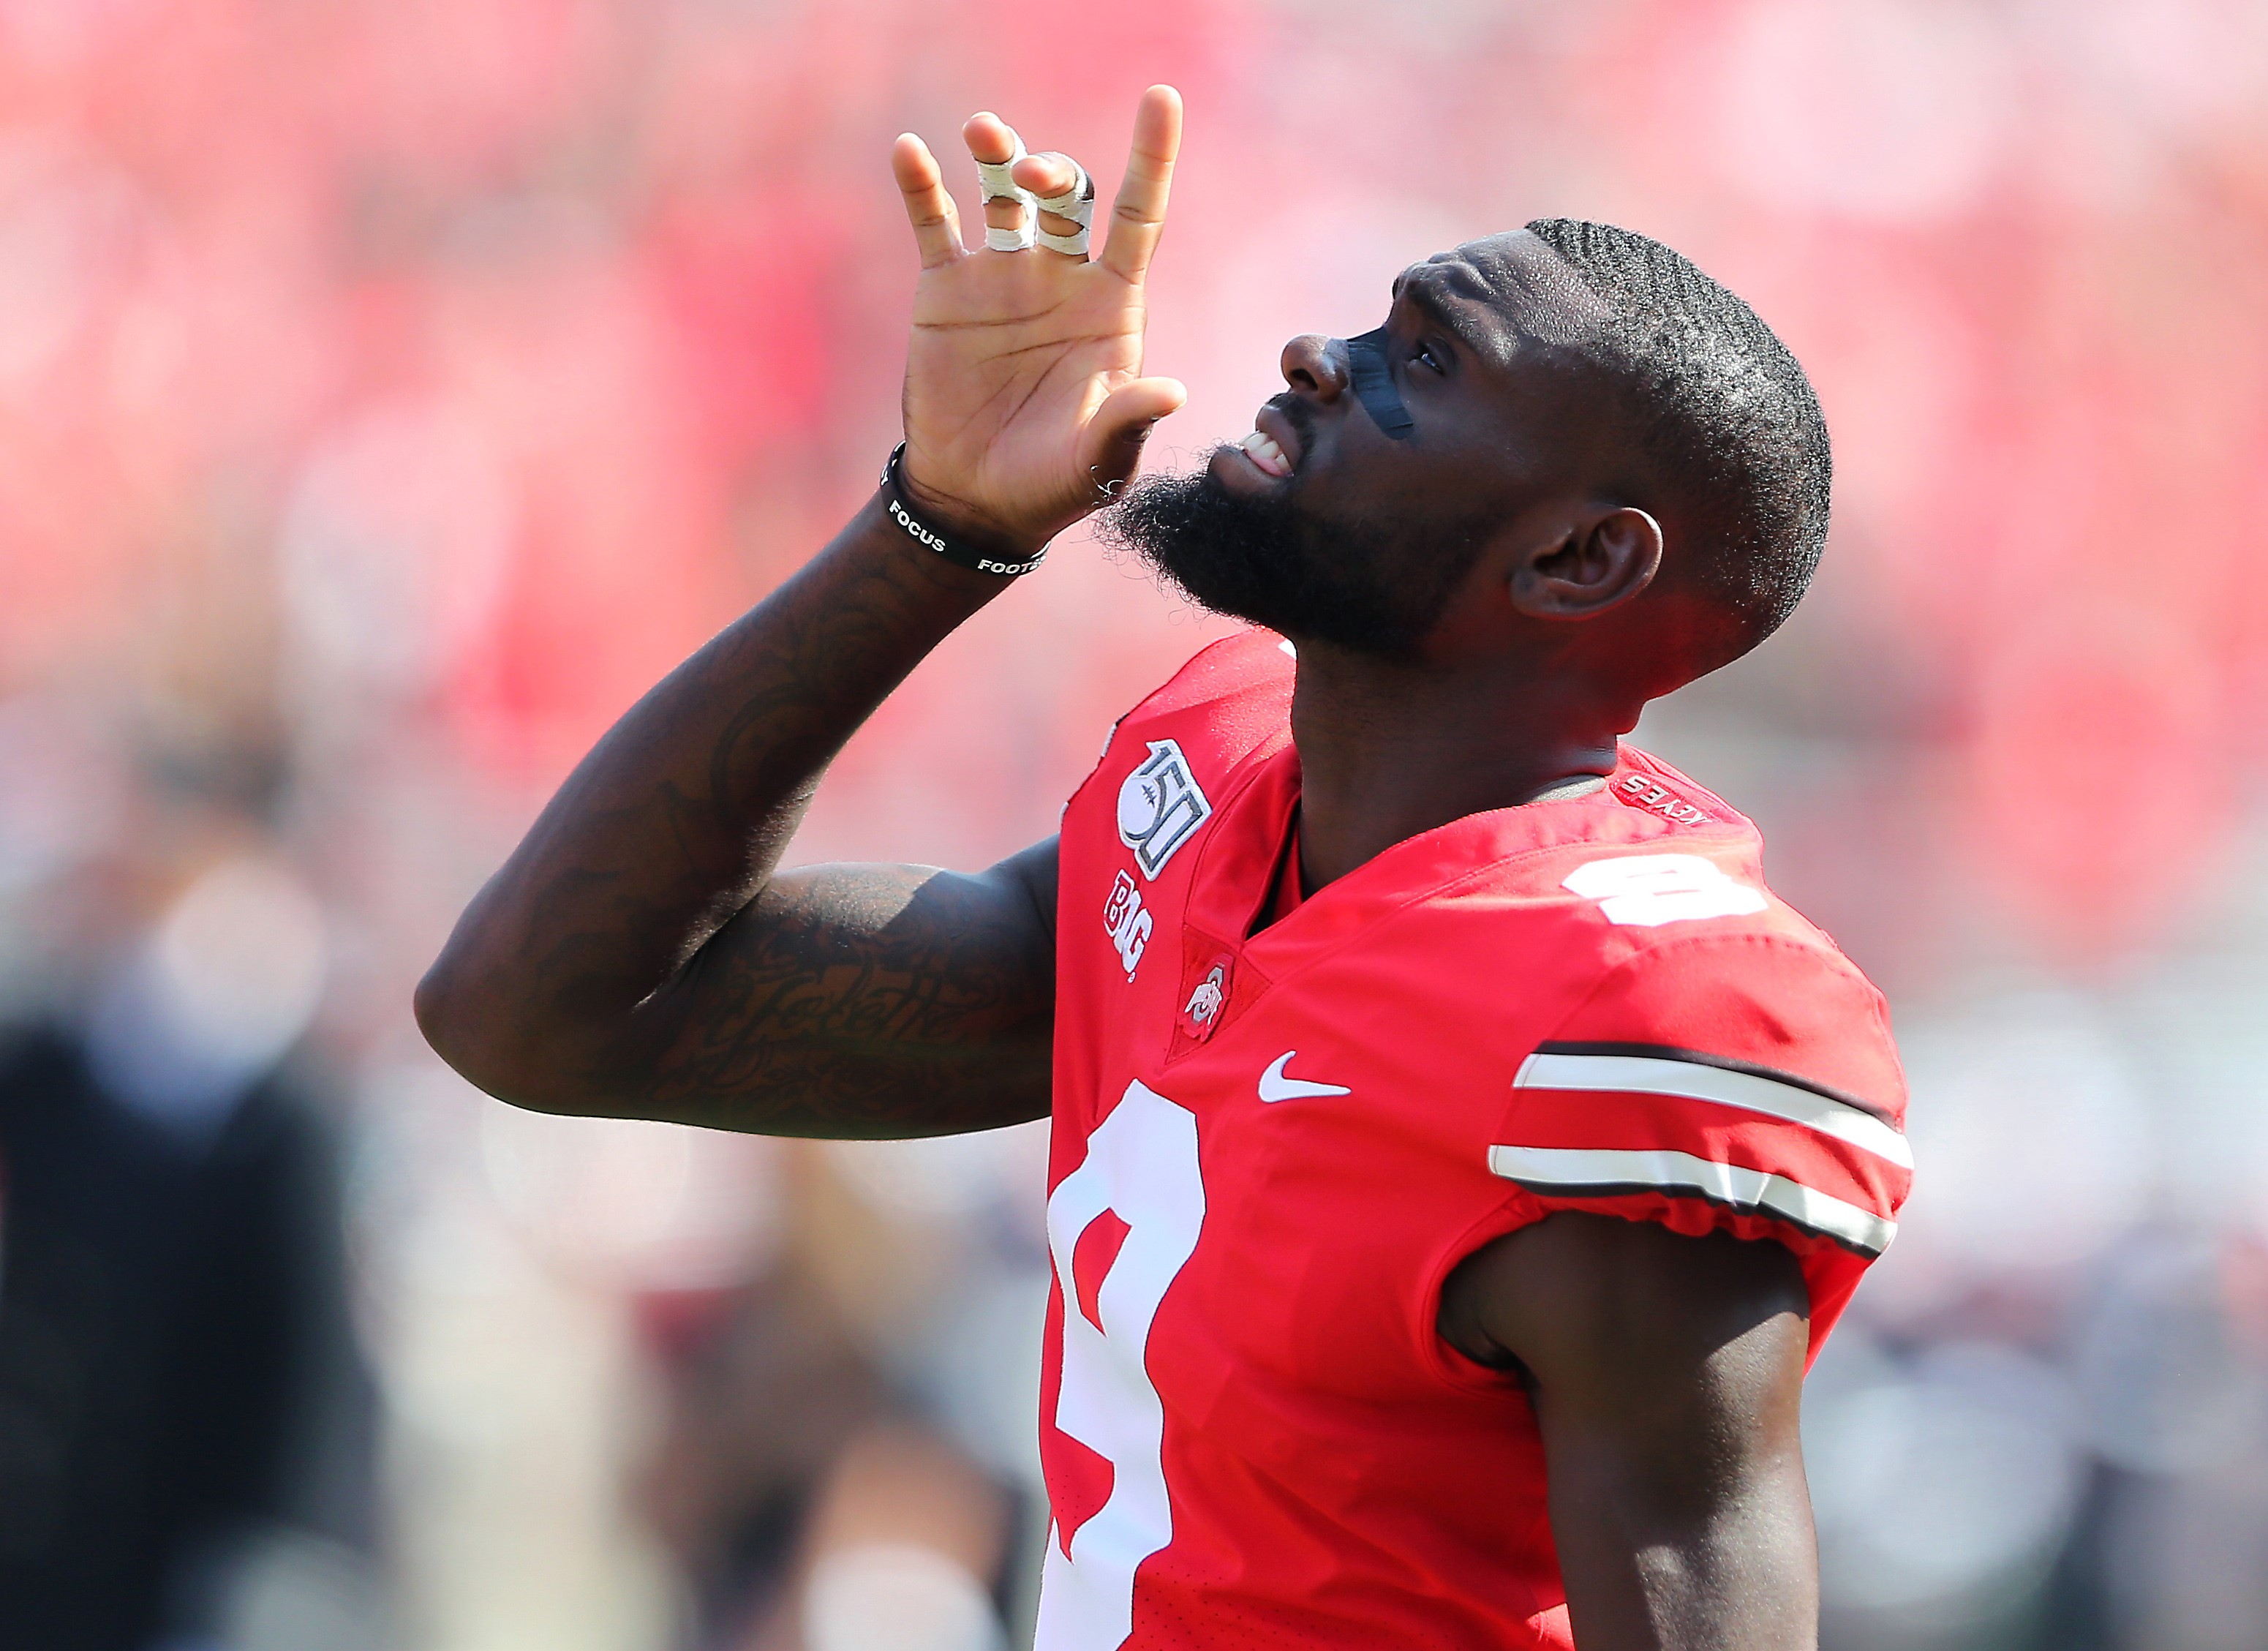 Ohio State football players in the NFL draft Likely landing spots